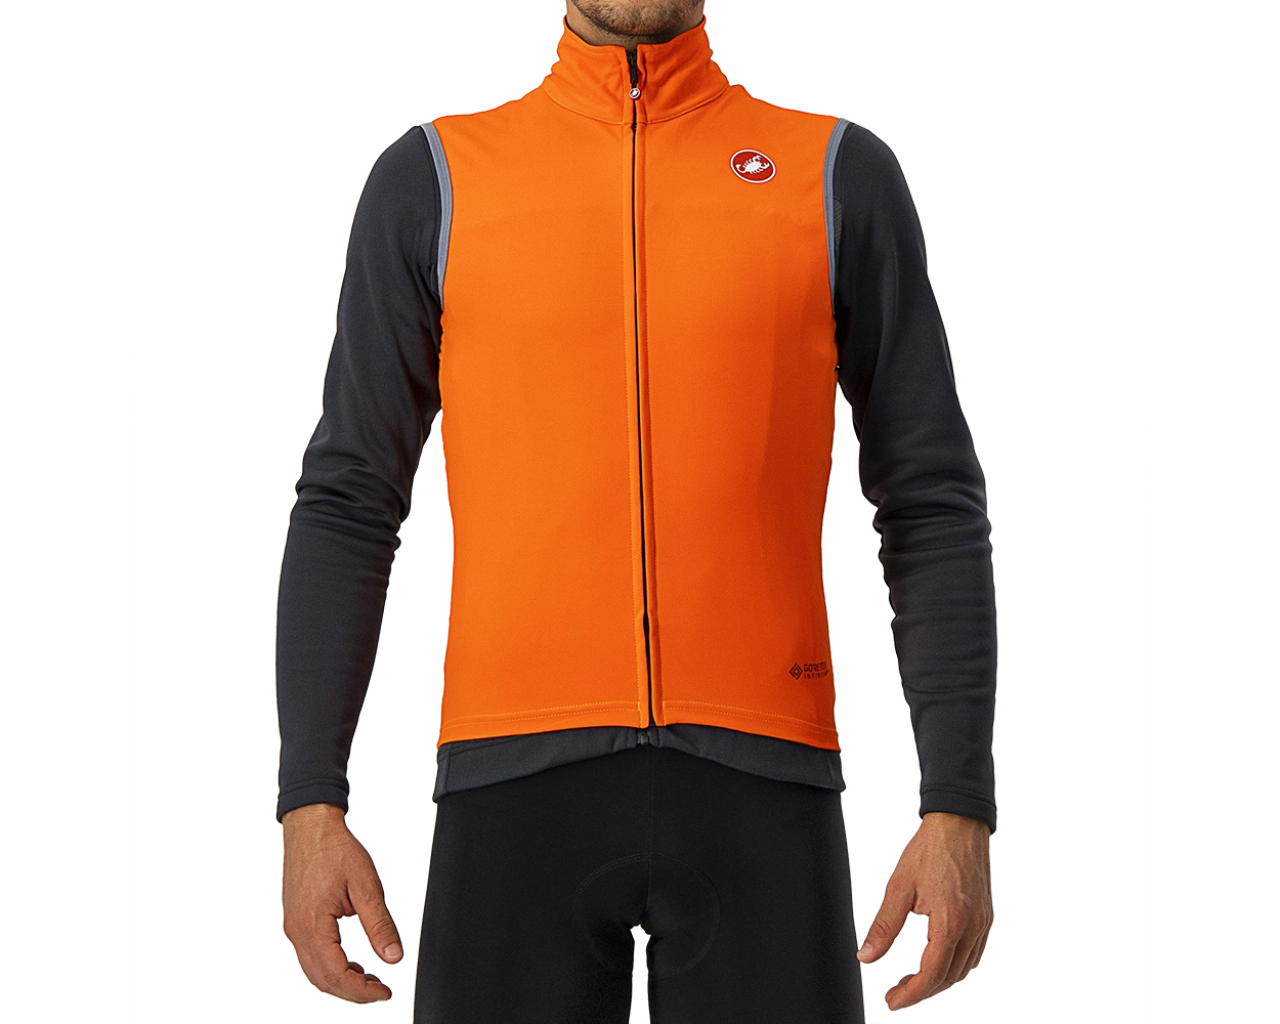 Castelli Perfetto RoS Cycling Vest - AW21 | Merlin Cycles